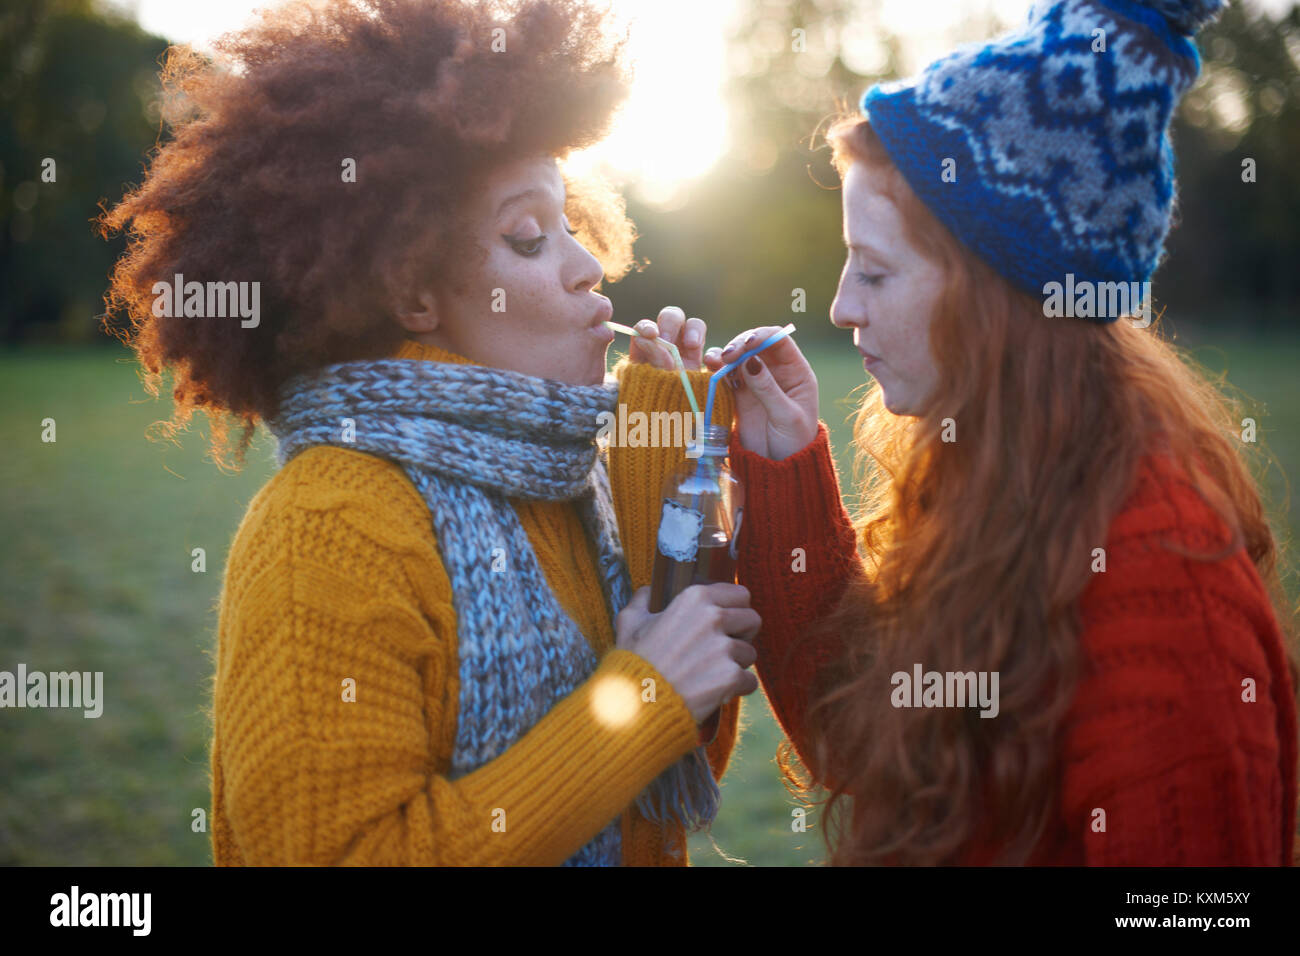 Two young women,in rural setting,drinking from bottle with straws Stock Photo